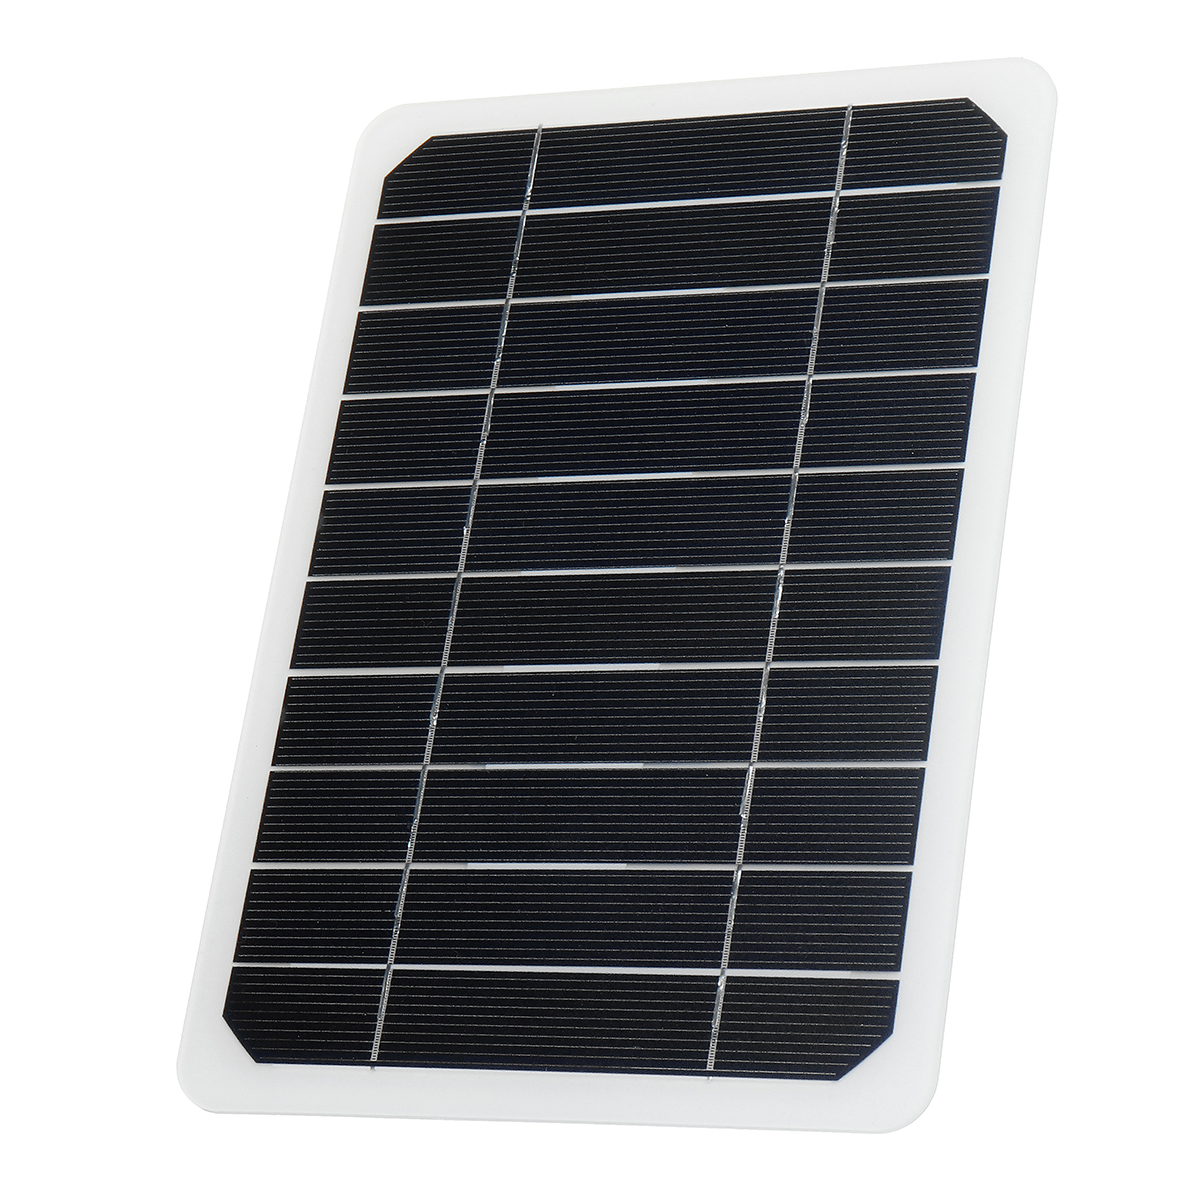 5W 5V USB Monocrystalline Silicon Solar Panel Phone Car Battery Outdoor Charger